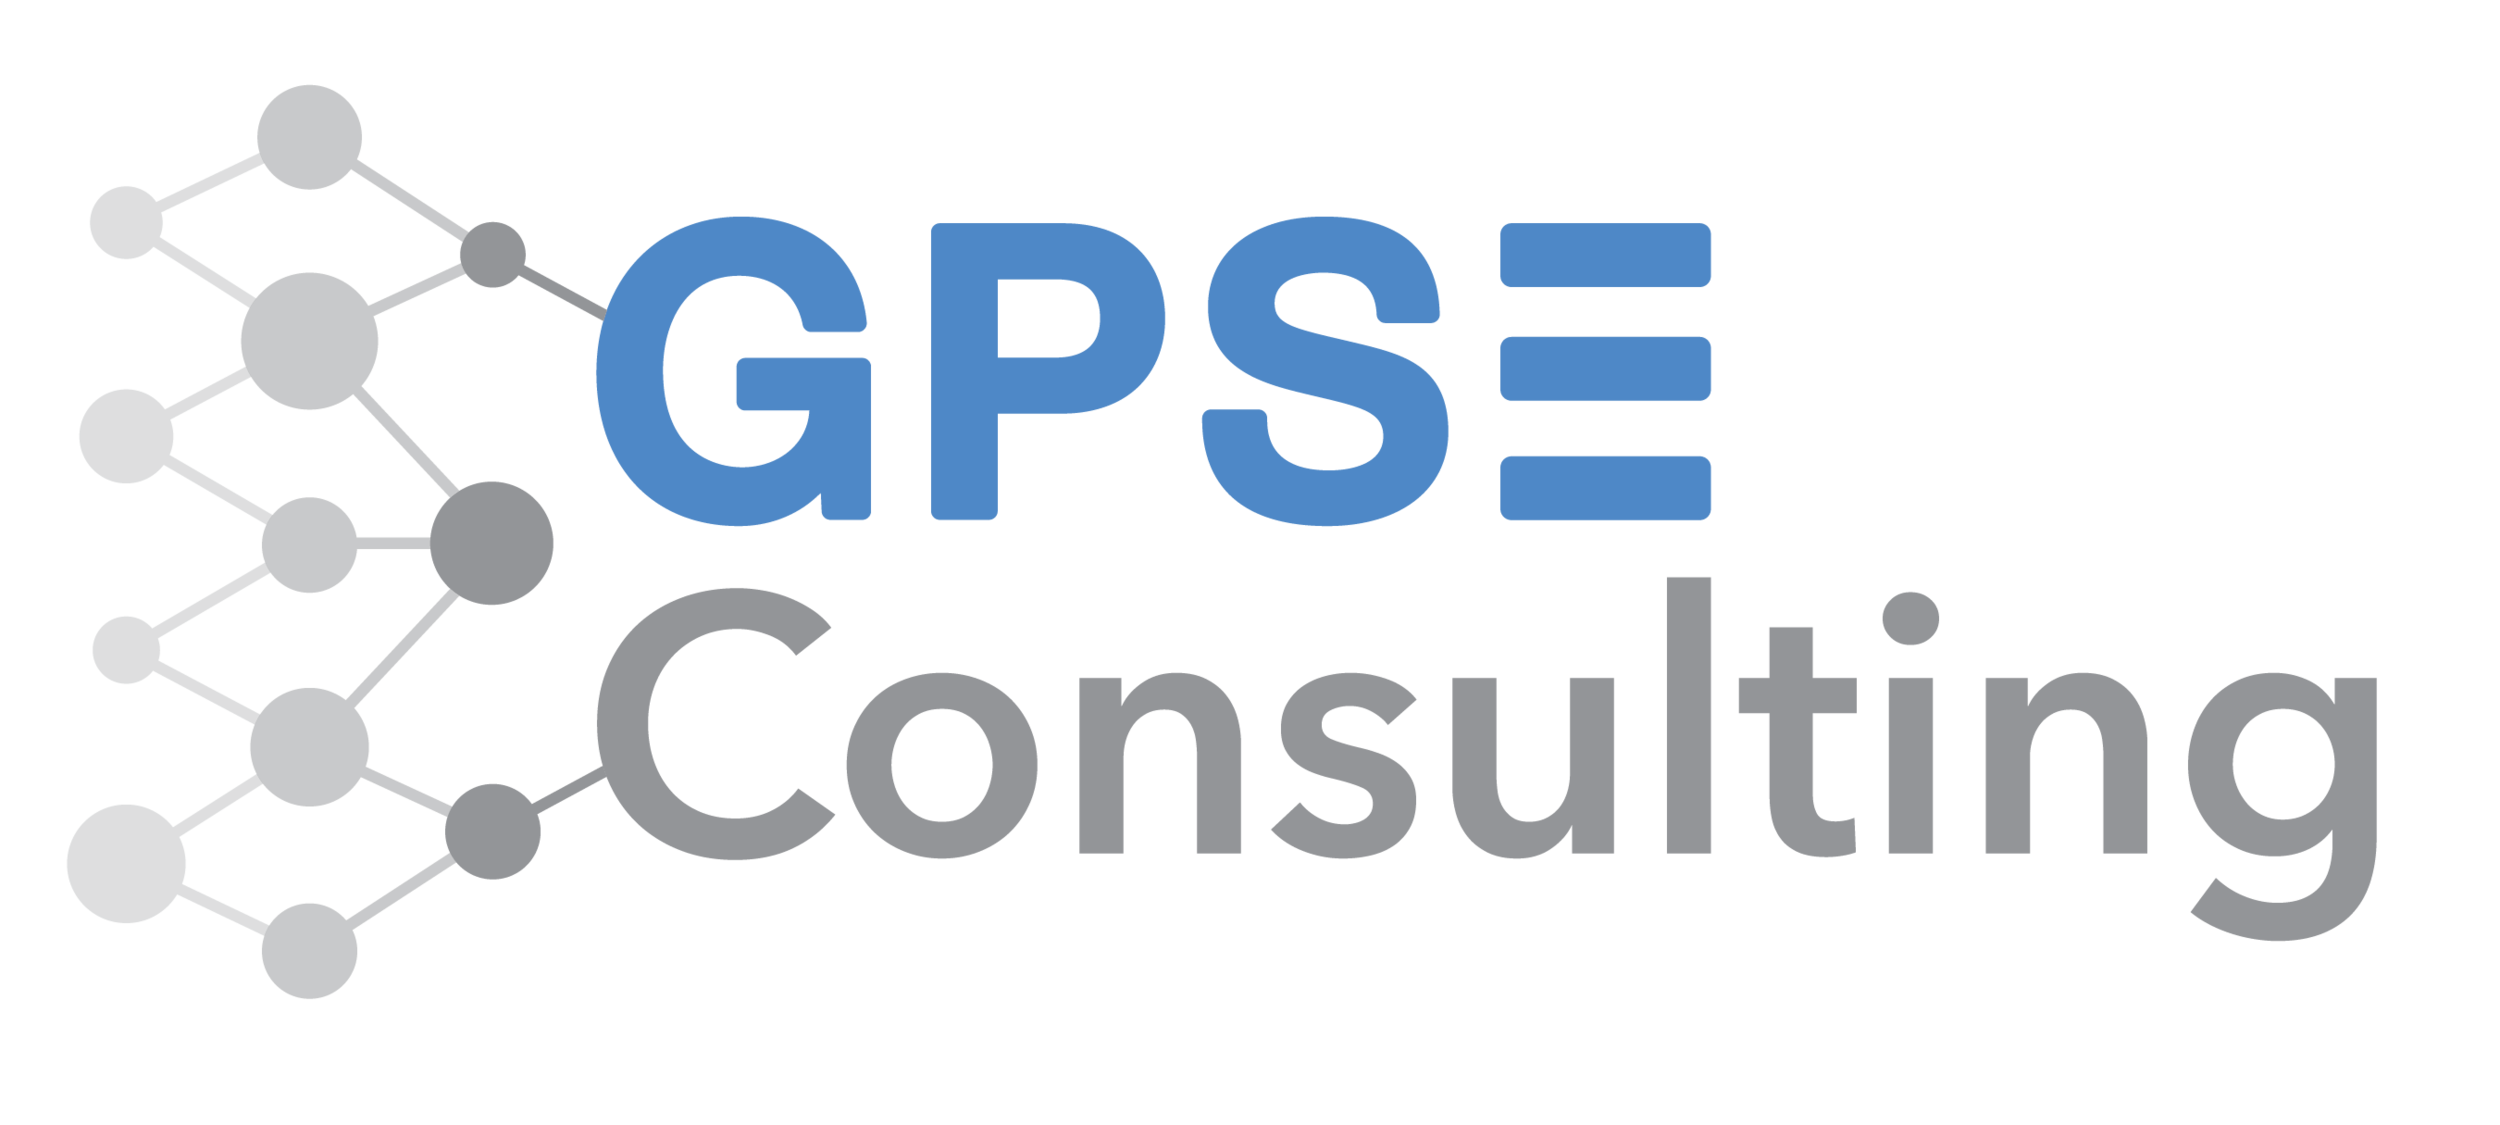 GPSE Consulting